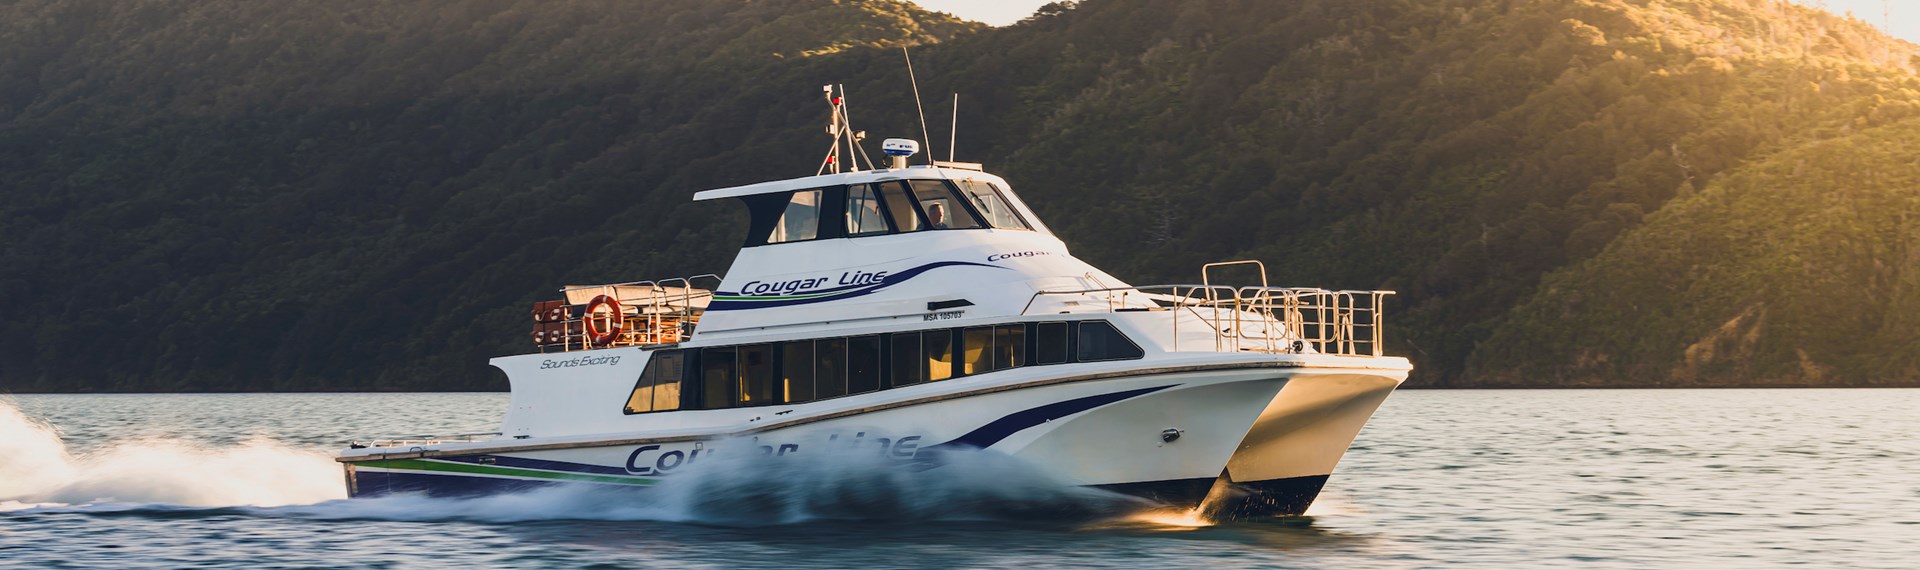 Cougar Line boat Sounds Exciting cruises through calm waters in Queen Charlotte Sound/Tōtaranui, Marlborough Sounds, New Zealand